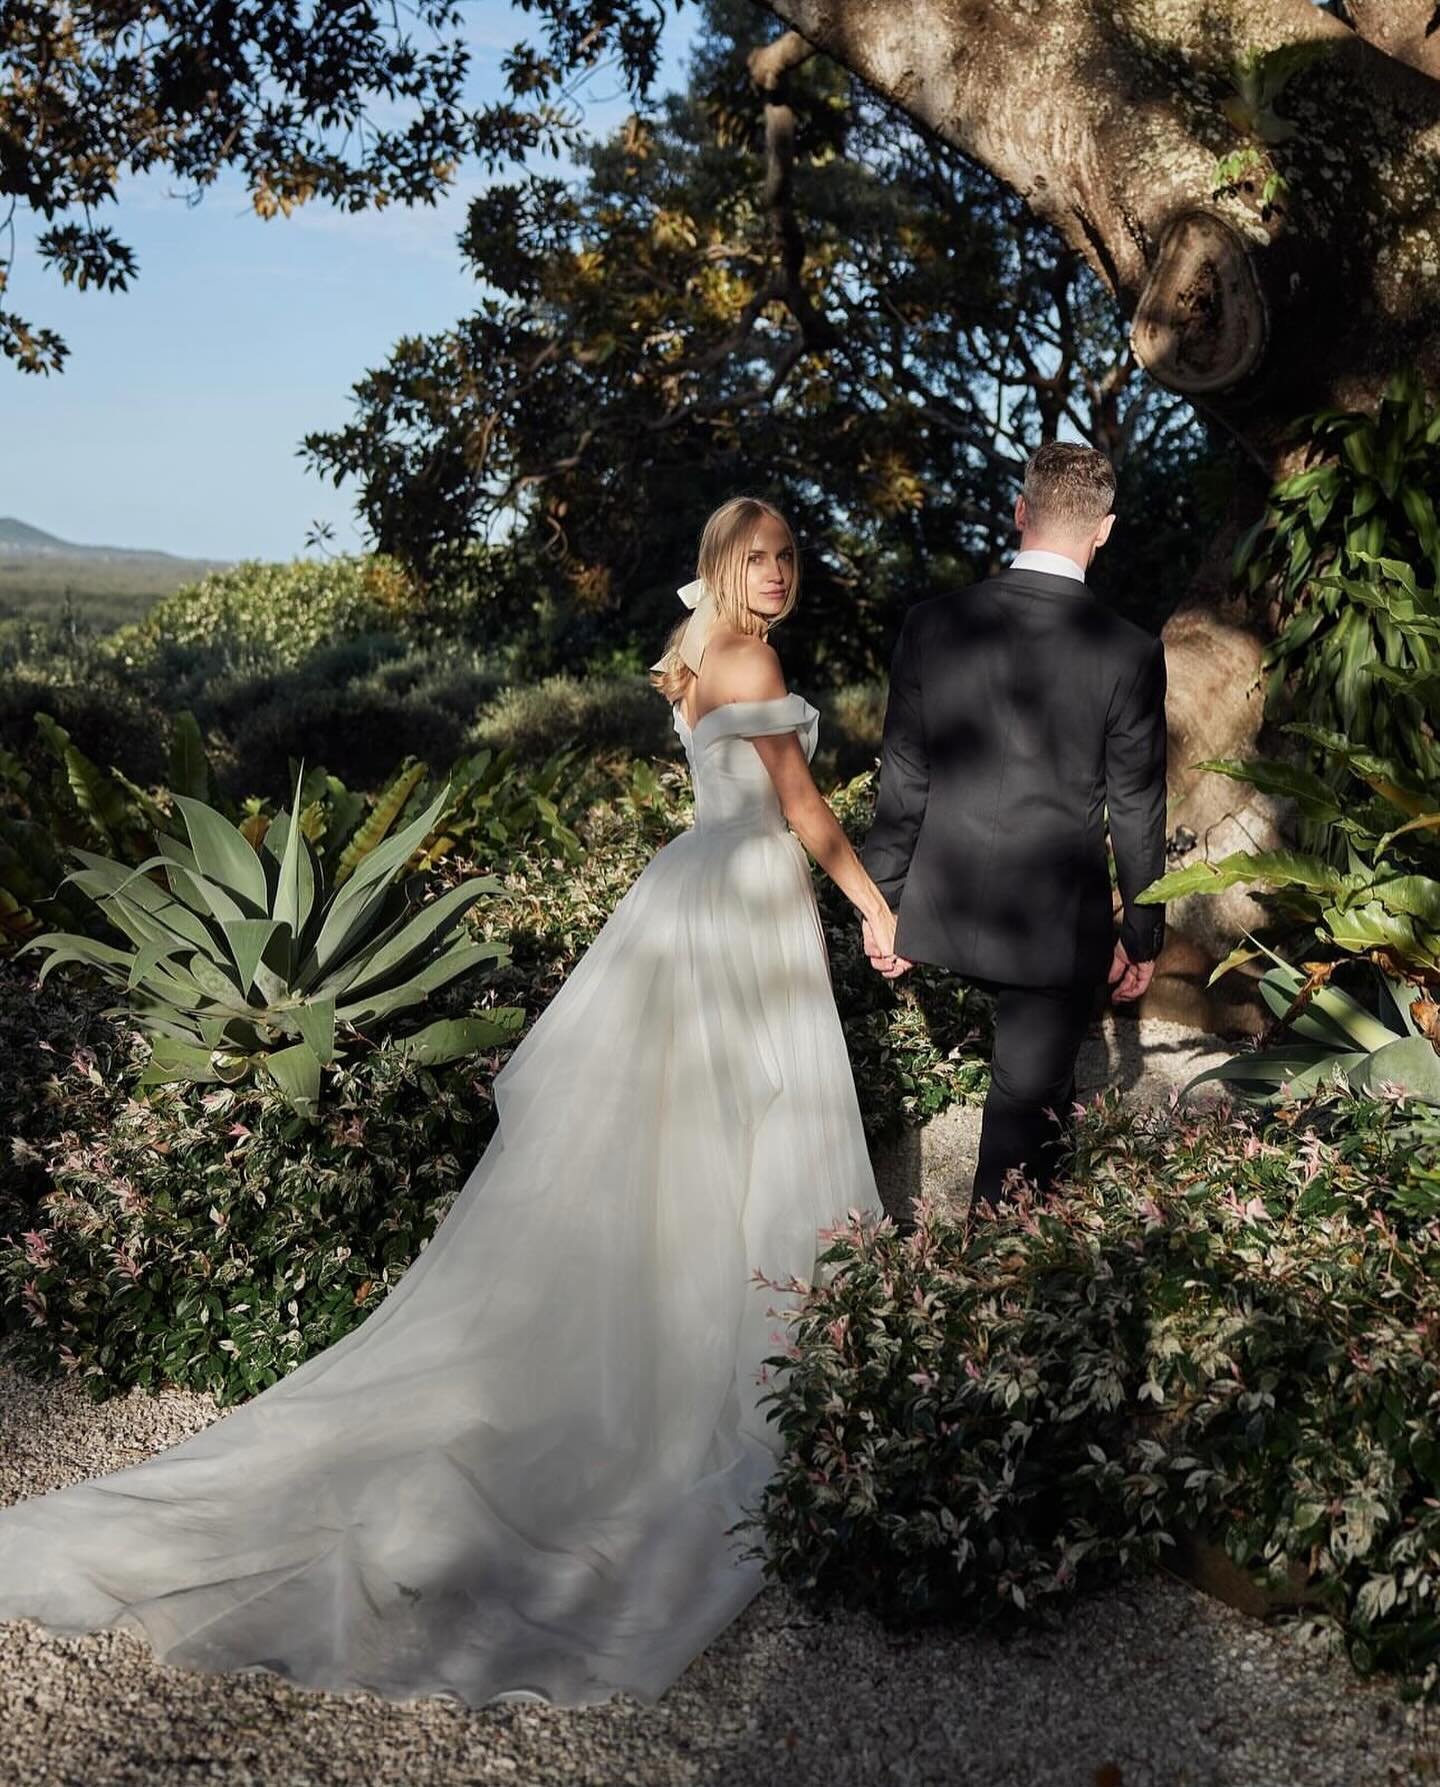 BREATHTAKING 🤍 Byron Bay Bliss for #hrrealbride Ella in her ethereal Monique Lhuillier gown, styled to perfection with Jennifer Behr bow | @lostinlove_photography @nikau.flora @moniquelhuillierbride @jenniferbehr @byronbayweddings